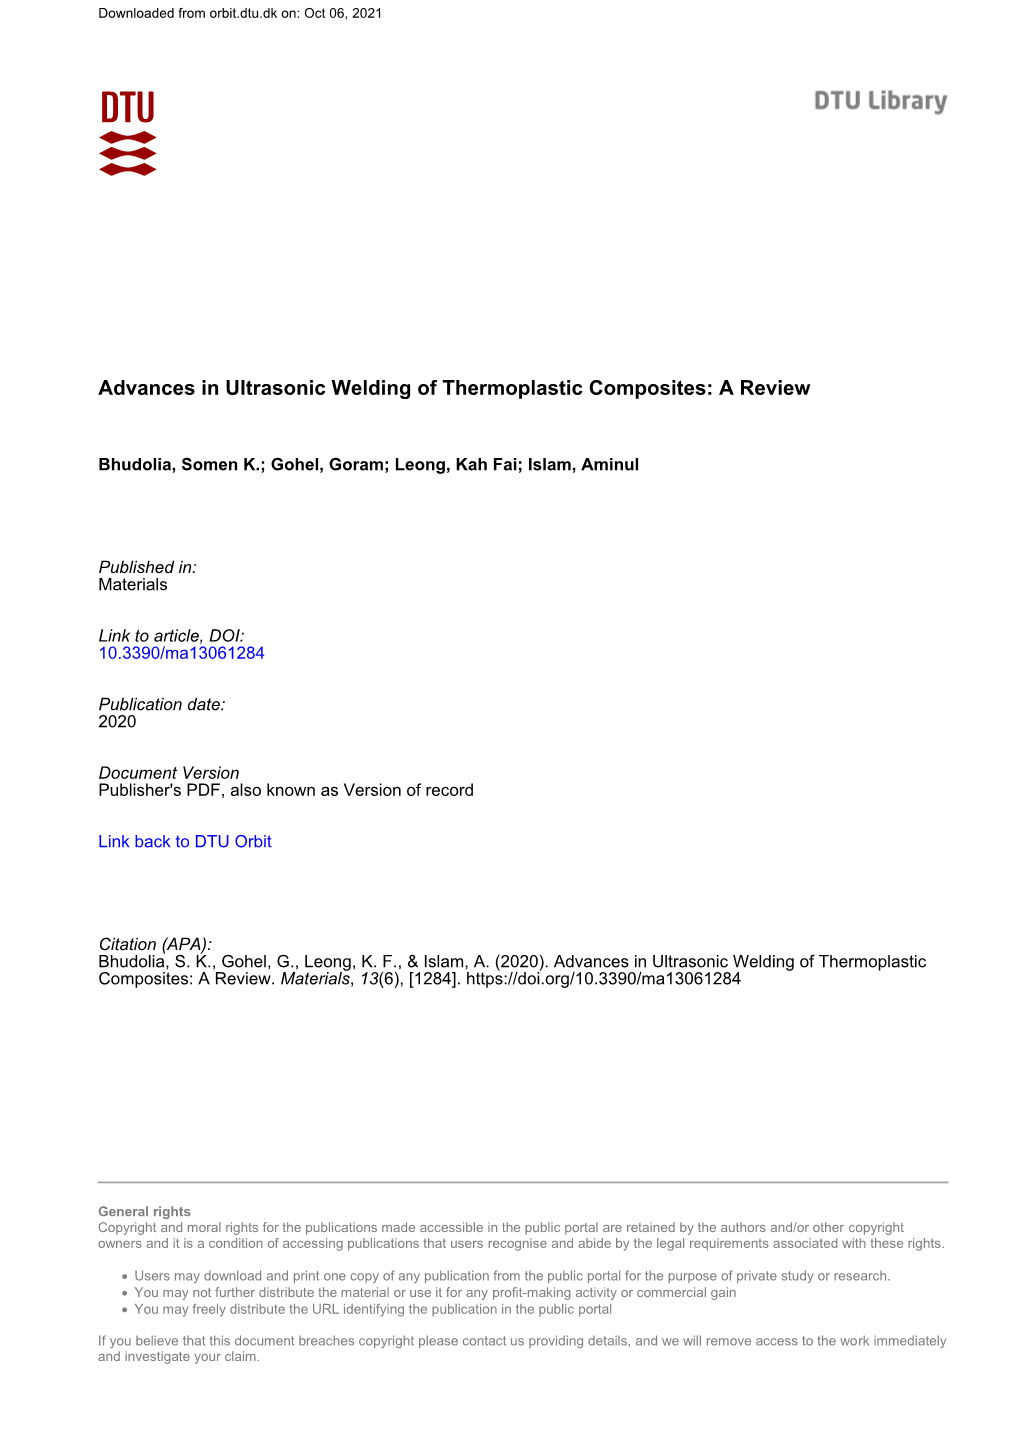 Advances in Ultrasonic Welding of Thermoplastic Composites: a Review